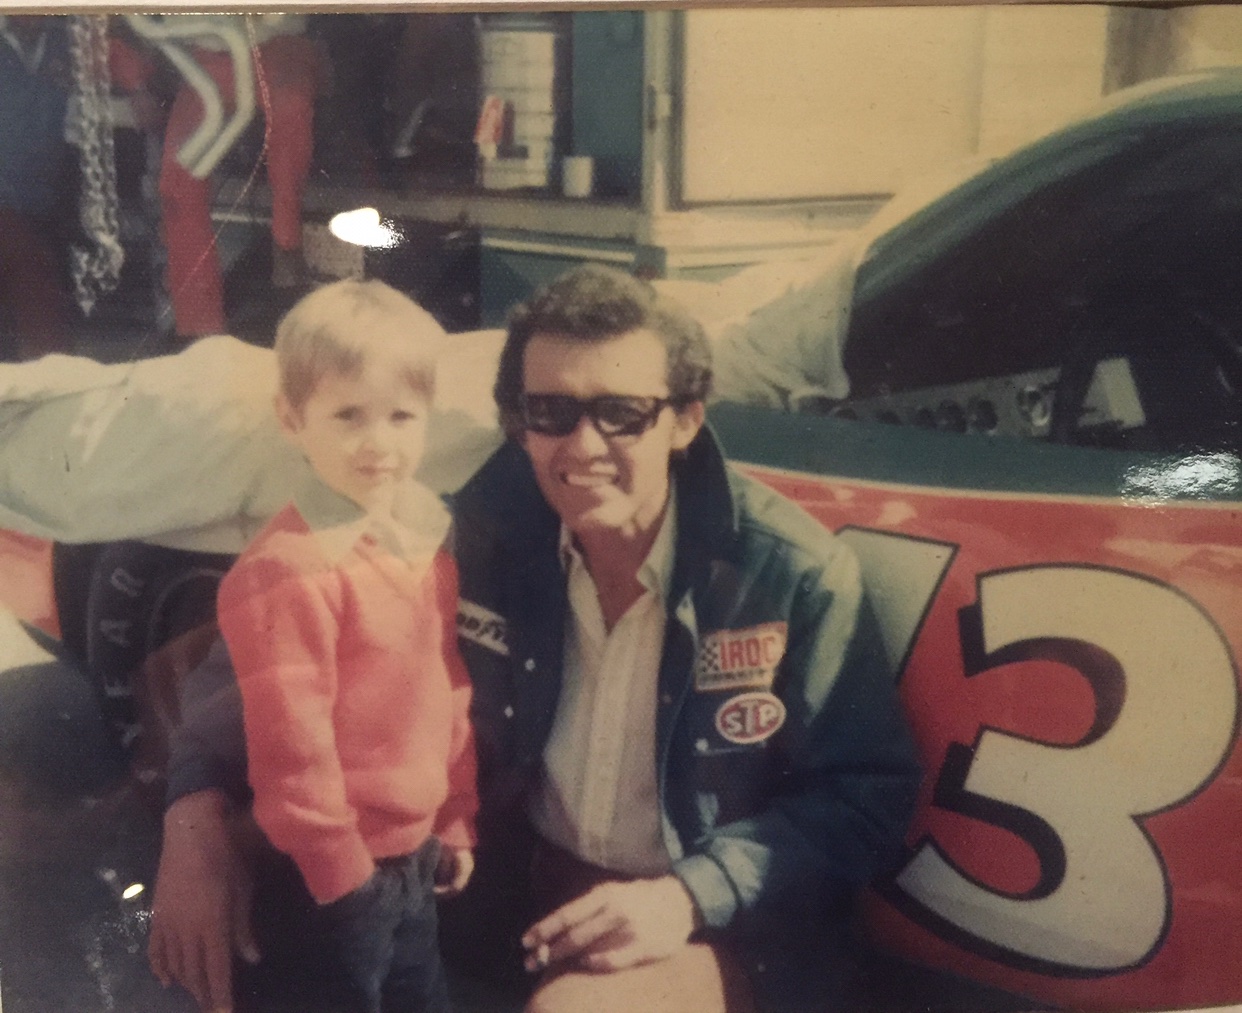  Happy Birthday Richard Petty 
One of my favorite all time pictures 